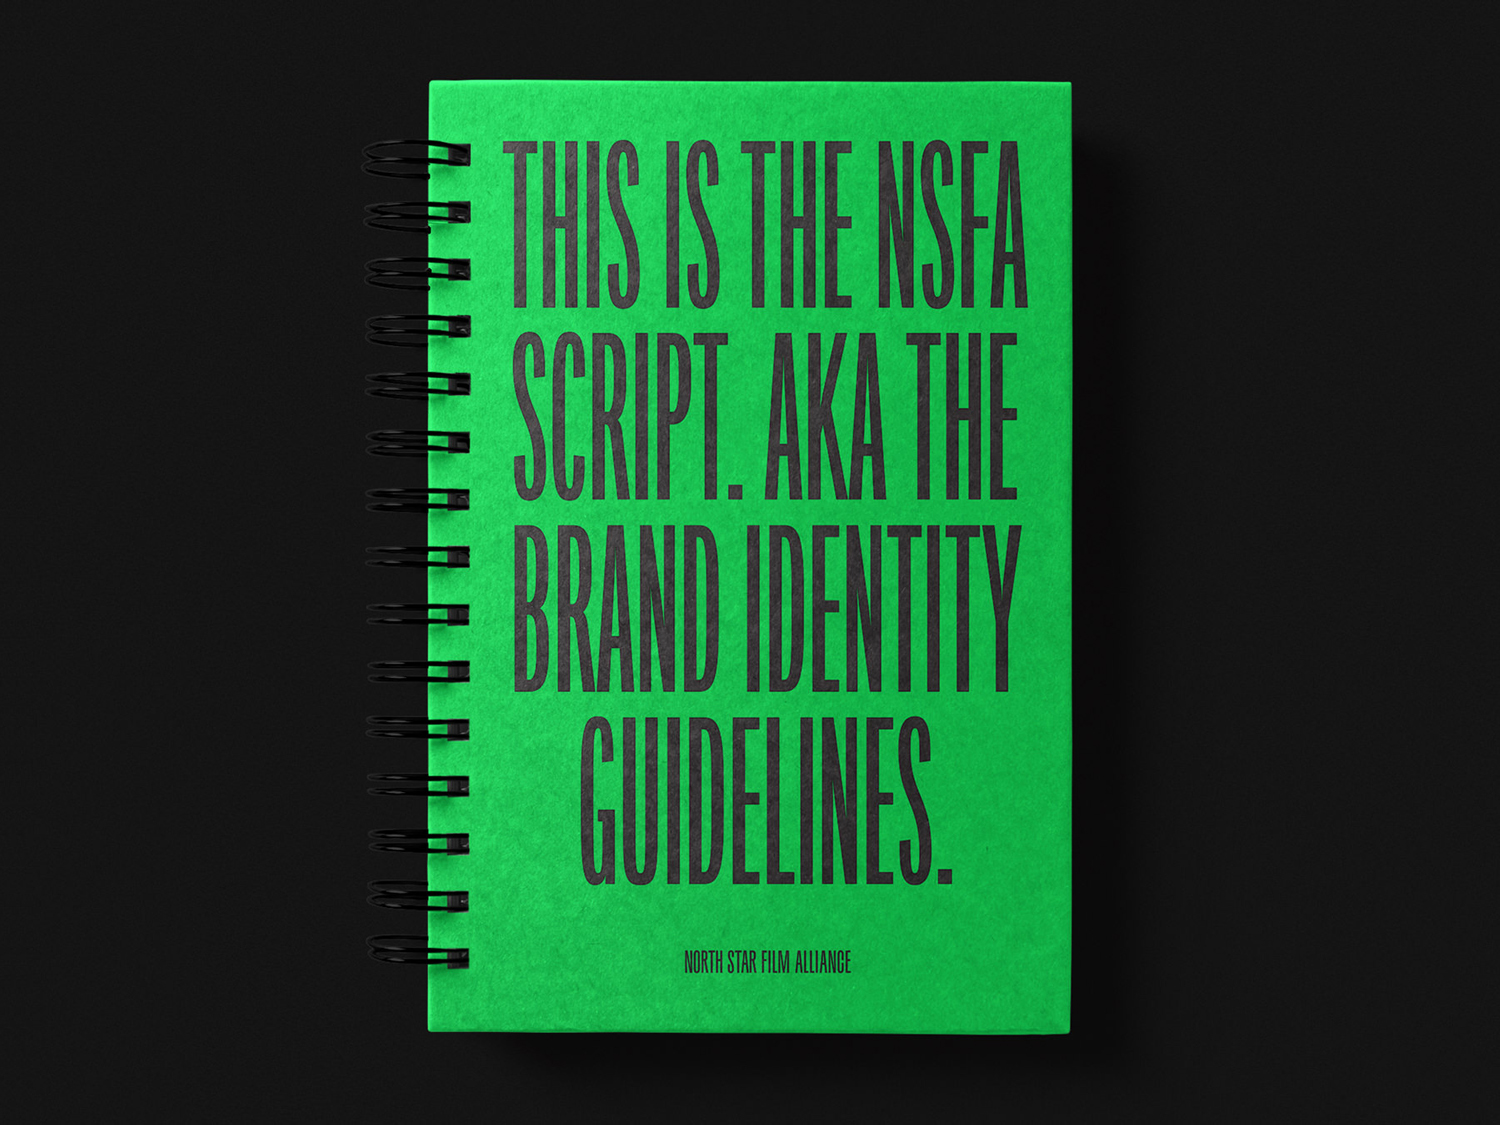 Brand identity guidelines, wire bound with a fluorescent green ink designed by Bond for the Northstar Film Alliance